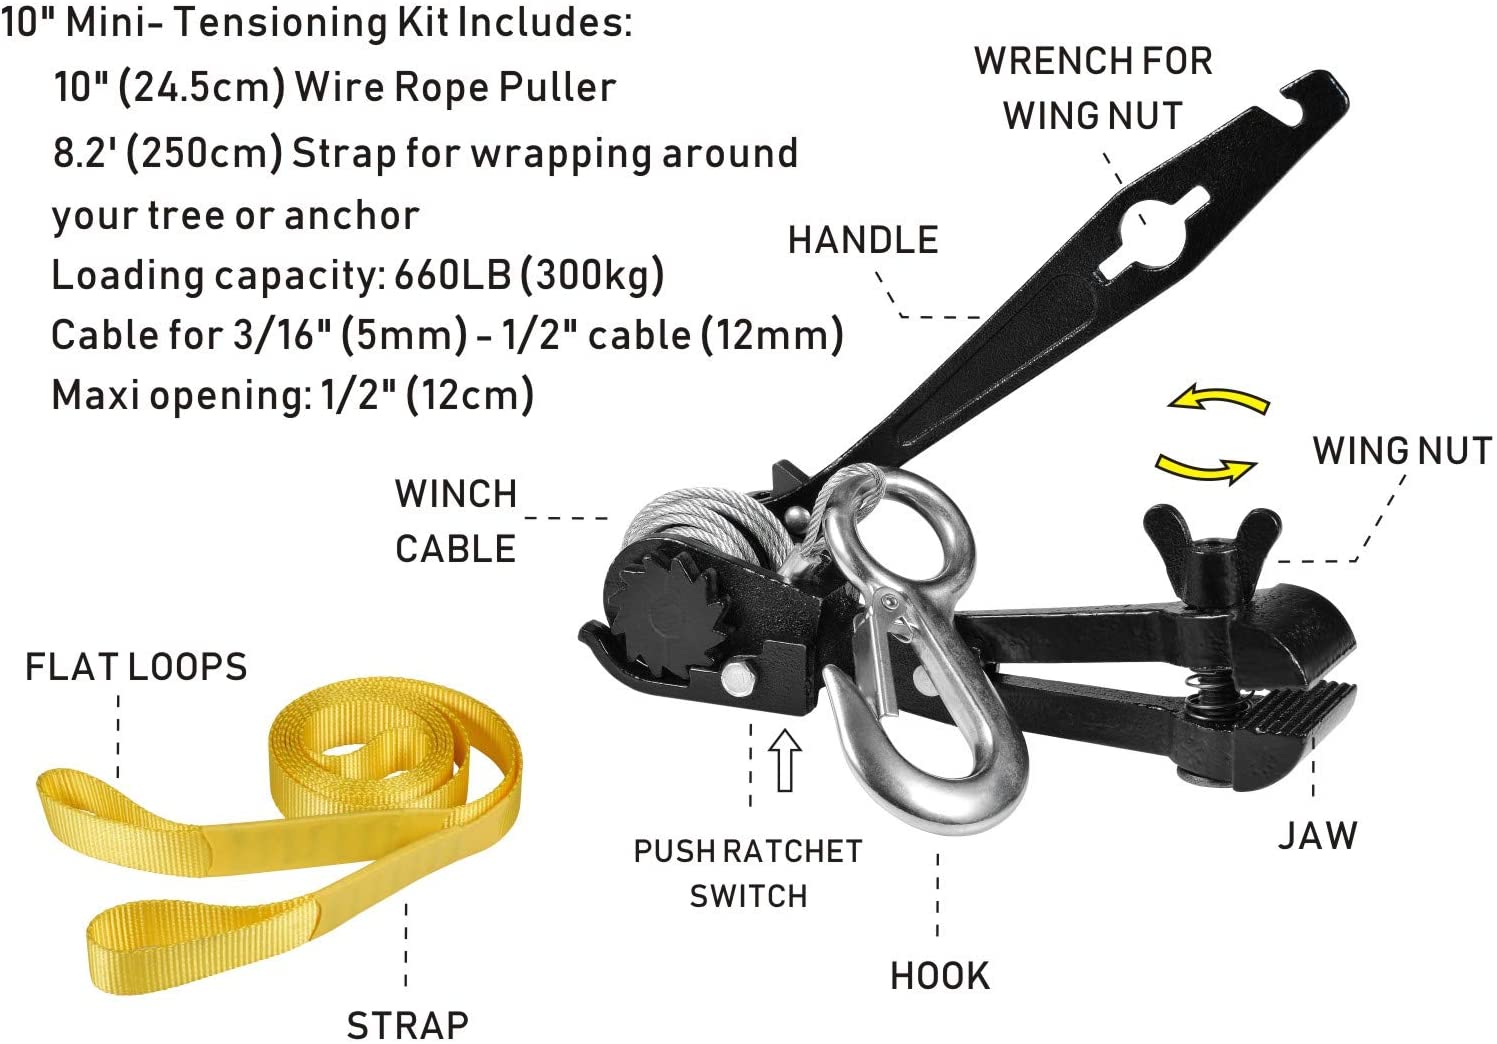 CTSC Zipline Cable Tensioning Kit - Zipline Installation Kits for Backyard with Mini Ratchet with Winch, Cable Grip for 3/16" to 1/2" Lines & Protective Tree Sling - Ultimate Zip Lines Tensioner Gear